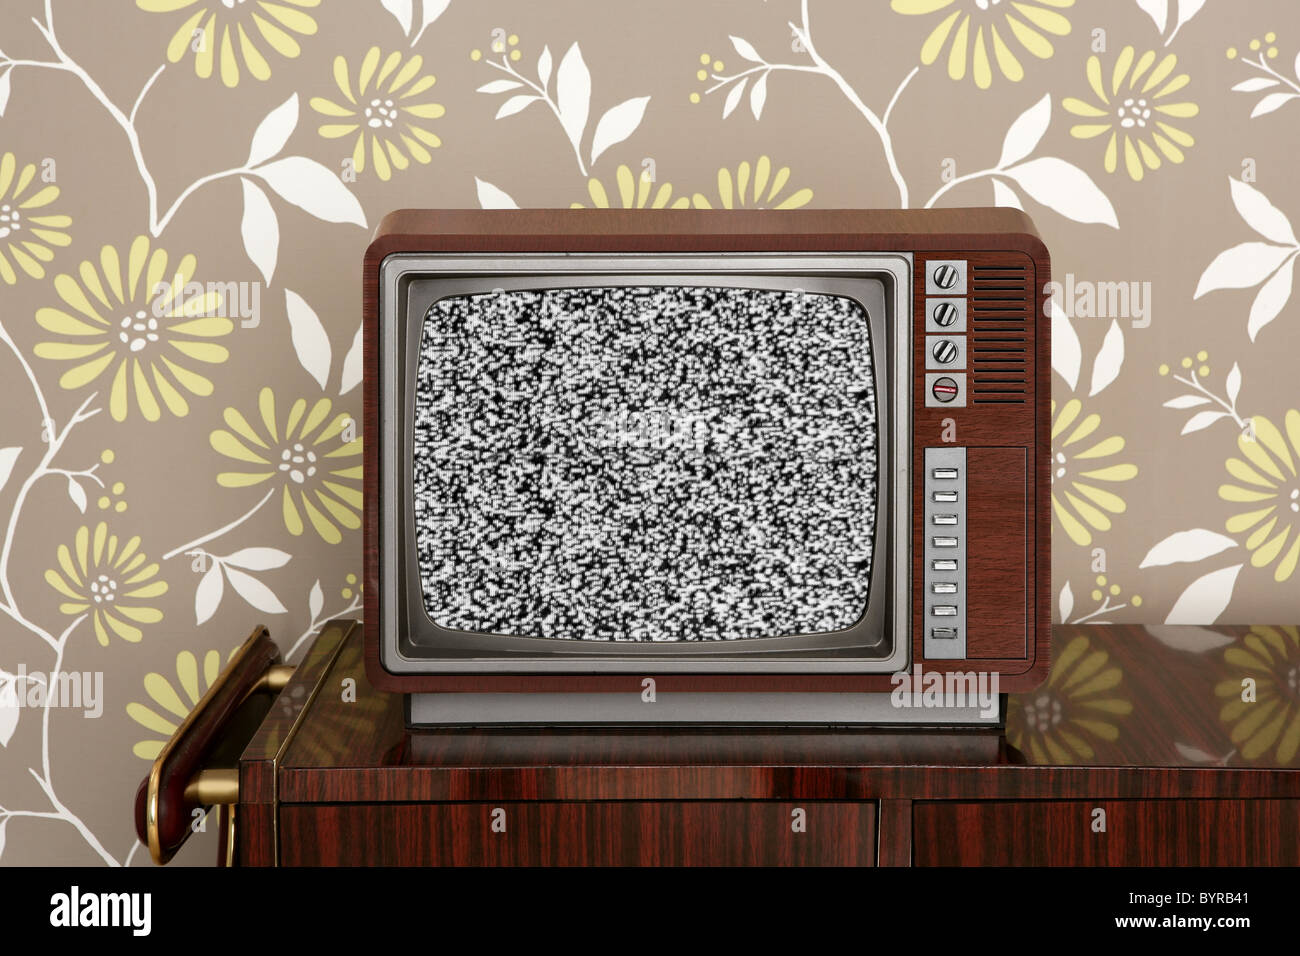 retro wooden tv on wooden vitage 60s furniture floral wallpaper Stock Photo